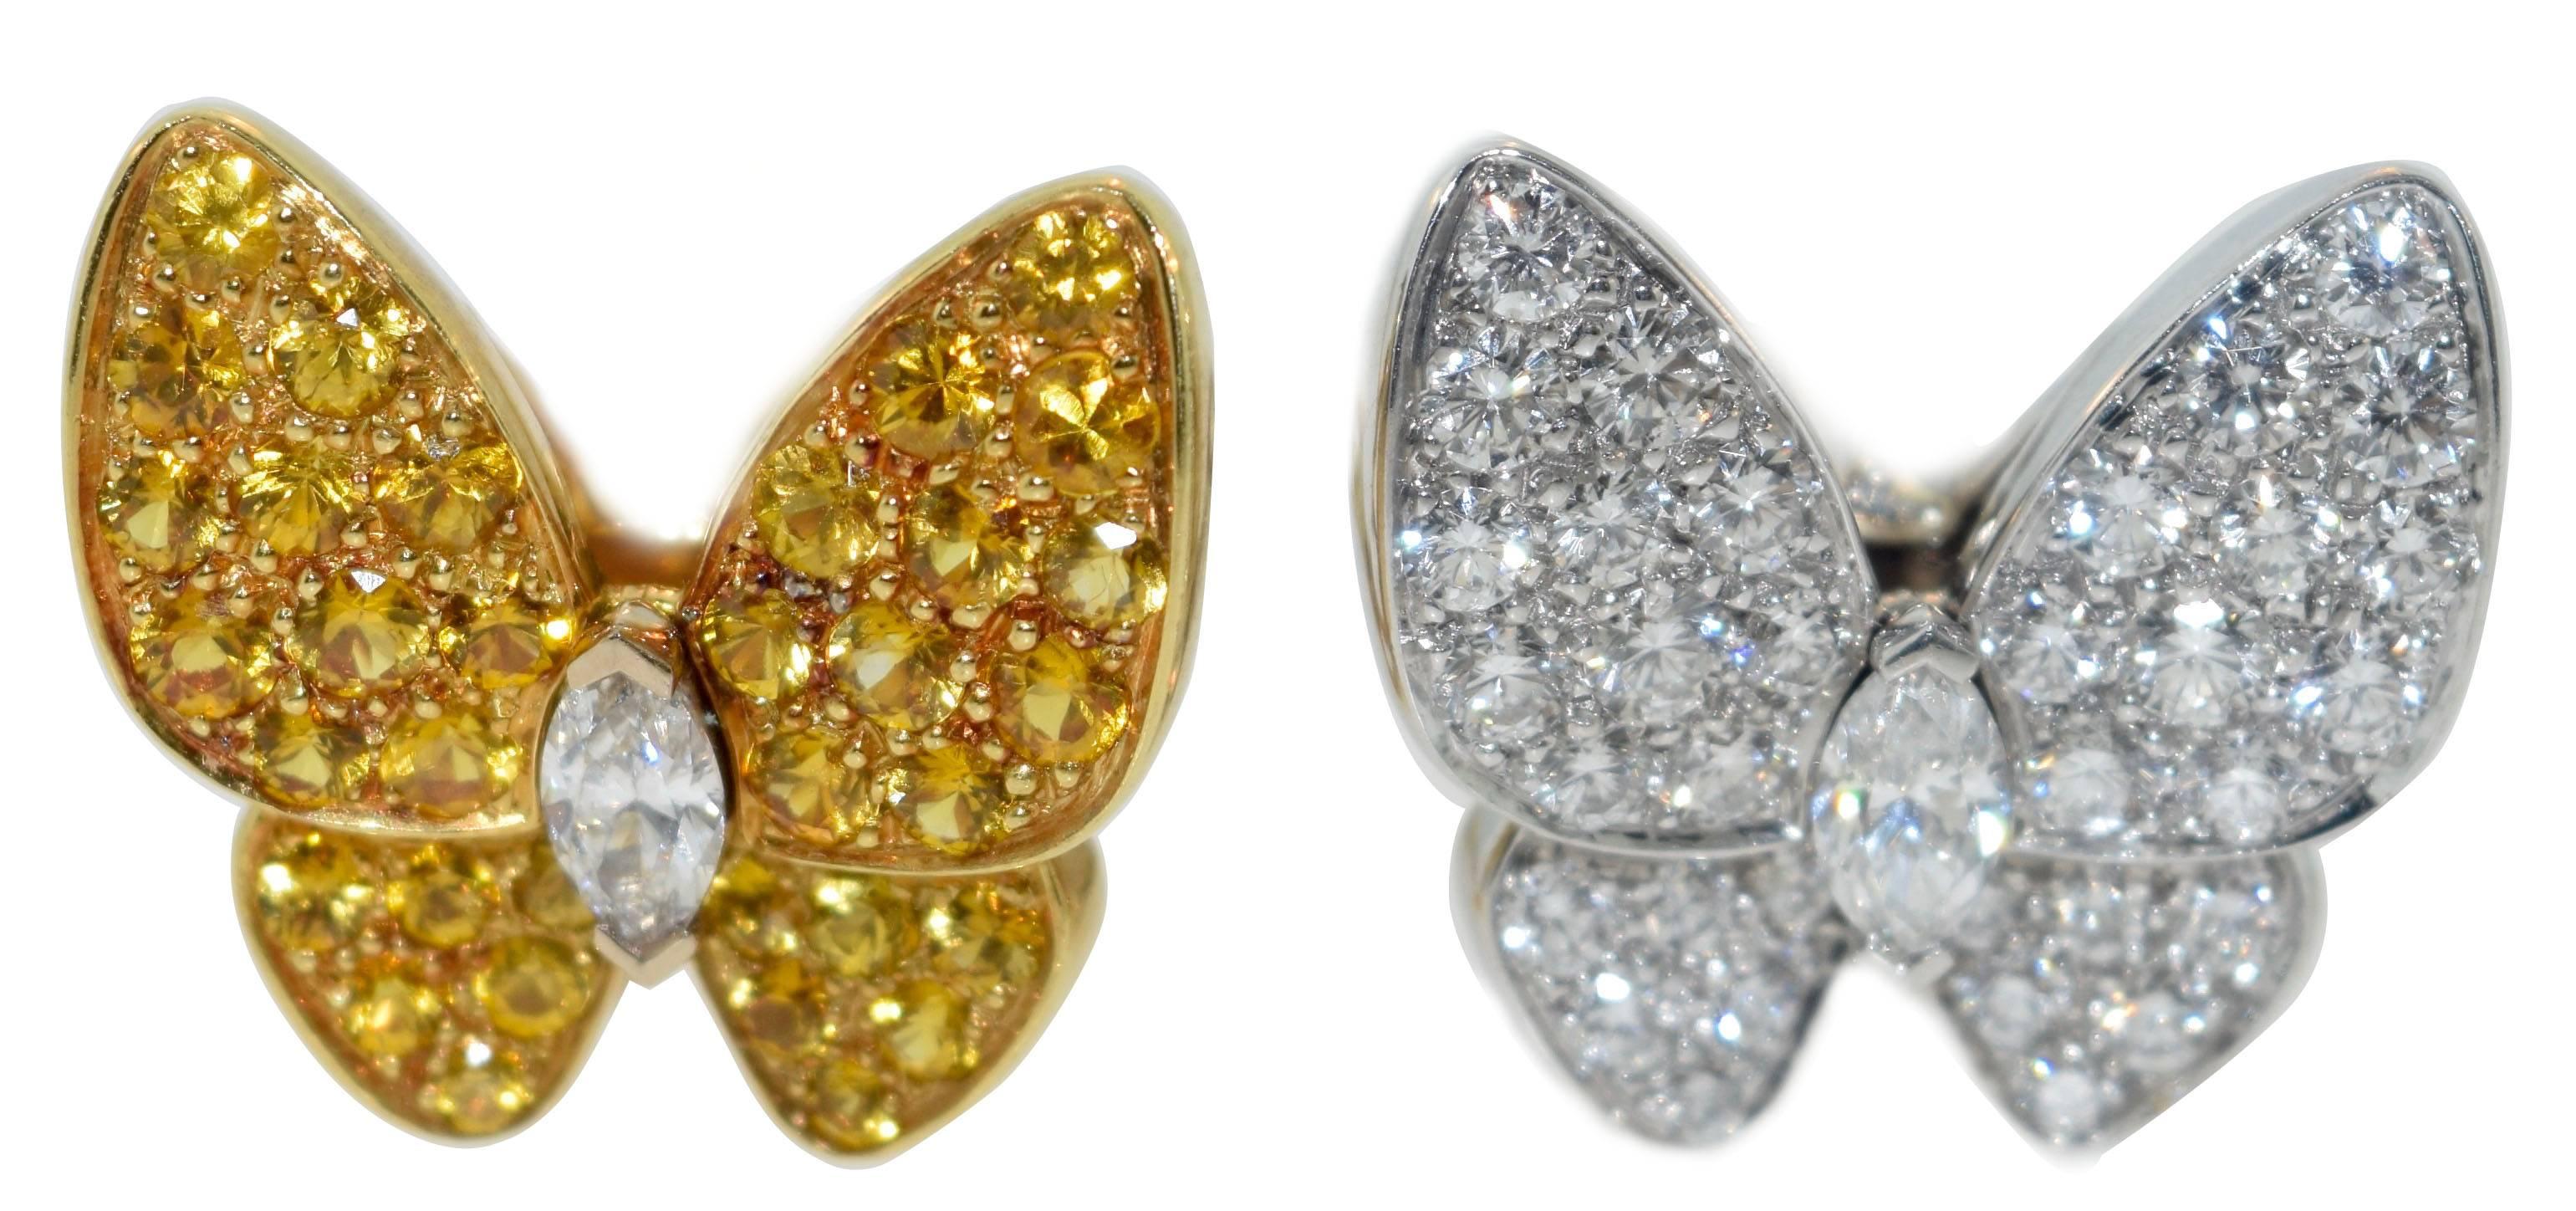 About the Item:
Two butterfly earrings, one butterfly motif in pavé round diamonds with a marquise-shaped diamond center and the other in pavé round yellow sapphires with a marquise-shaped diamond center, the diamonds weighing approximately 0.99